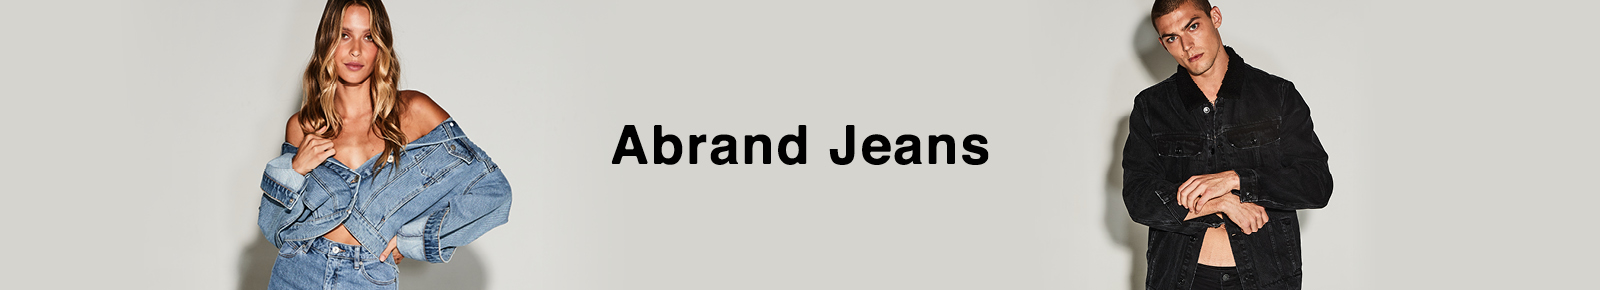 abrand jeans myer